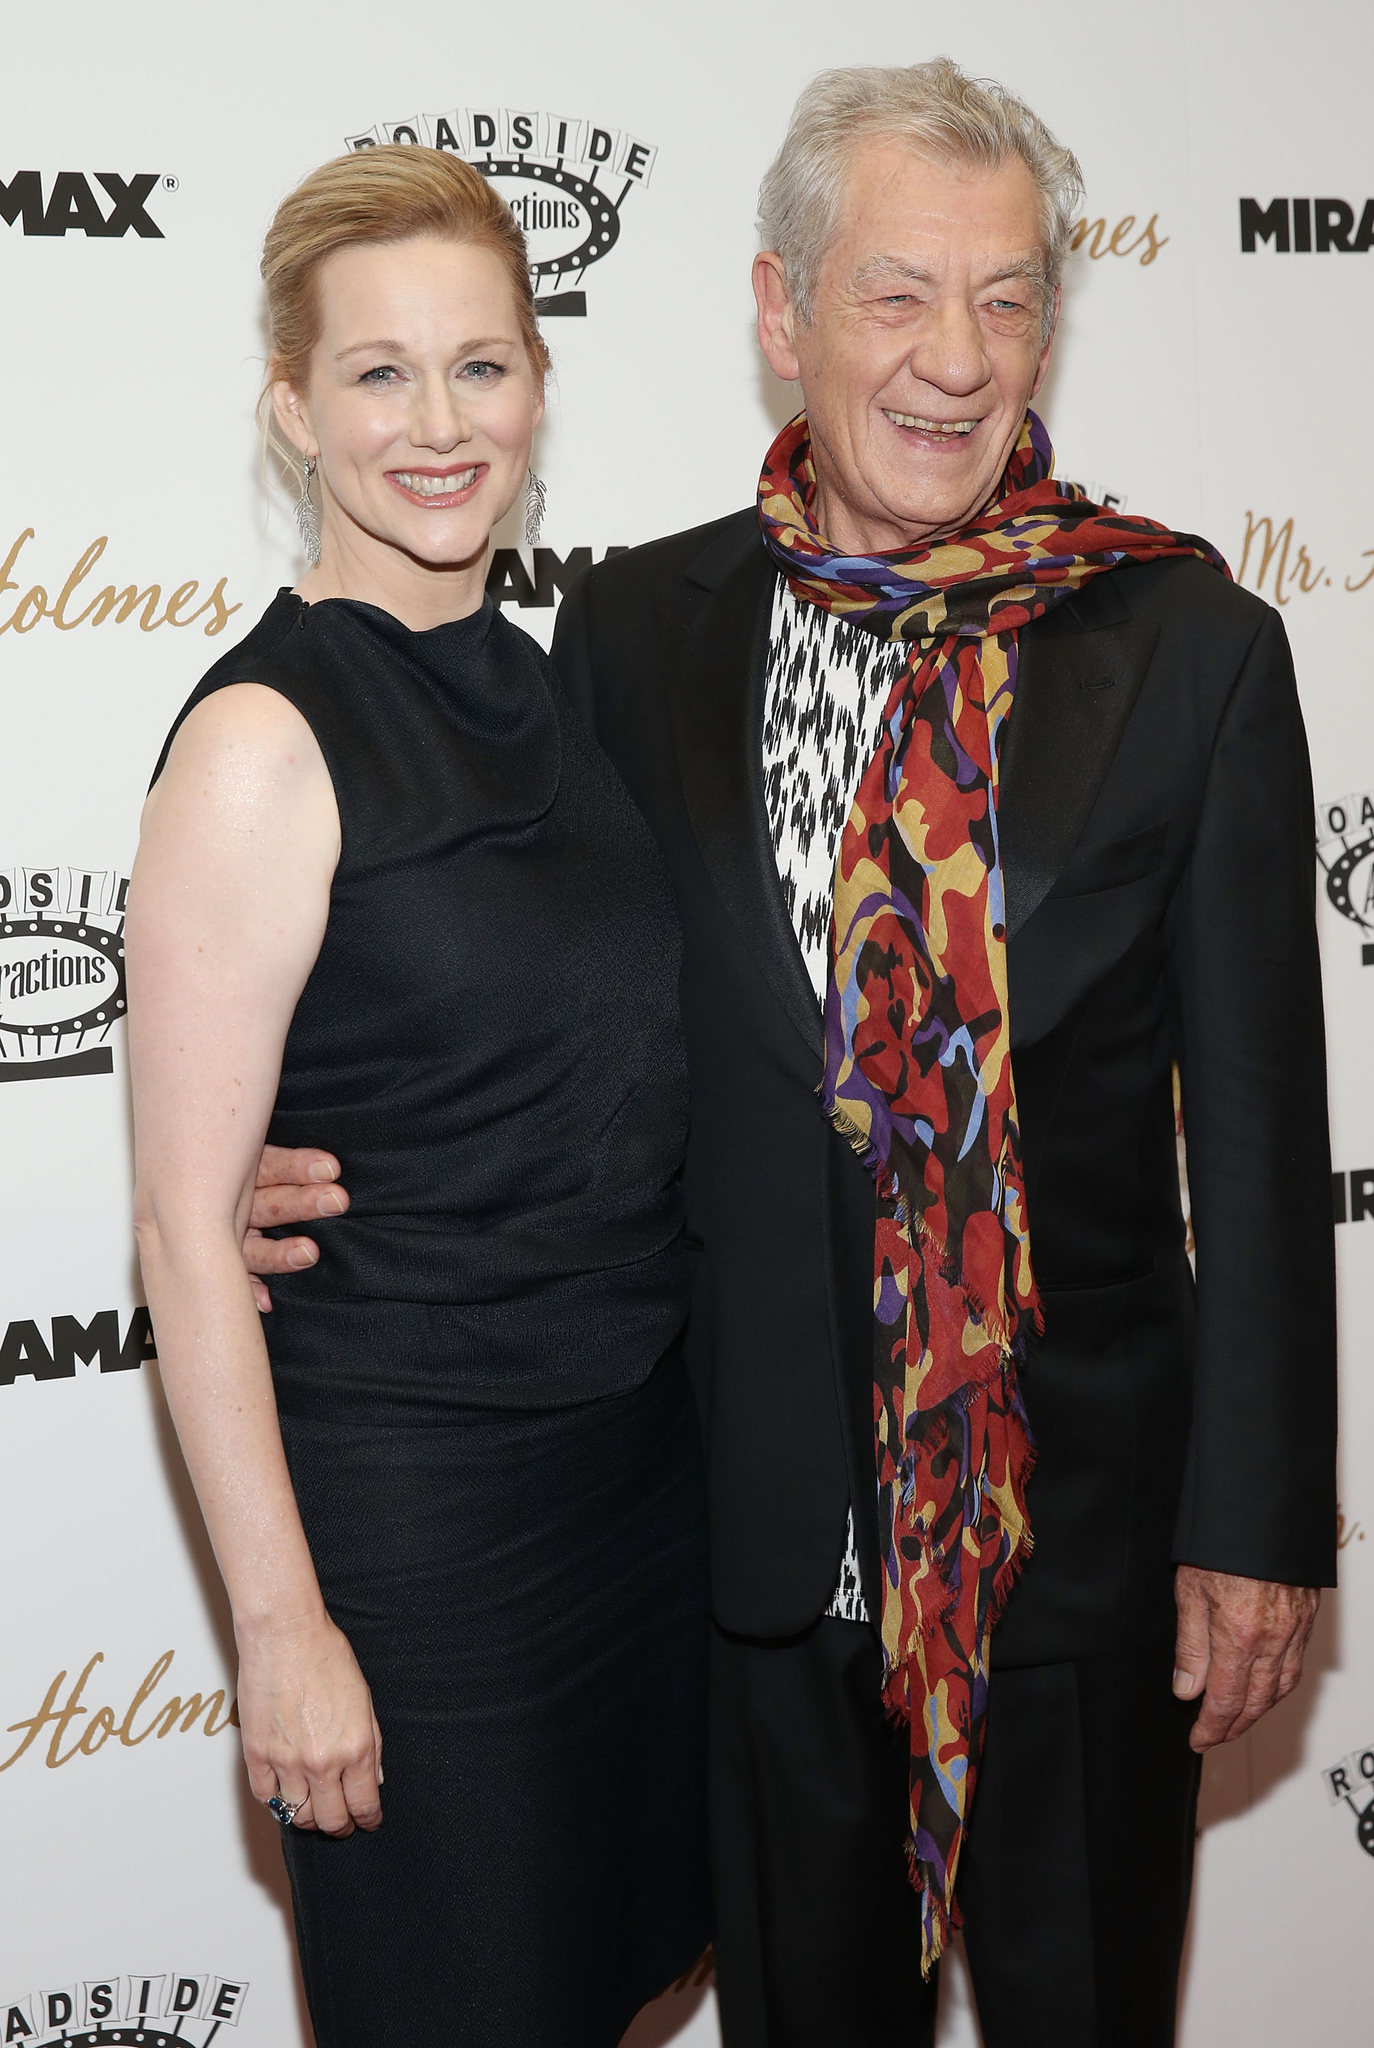 Laura Linney and Ian McKellen at event of Mr. Holmes (2015)